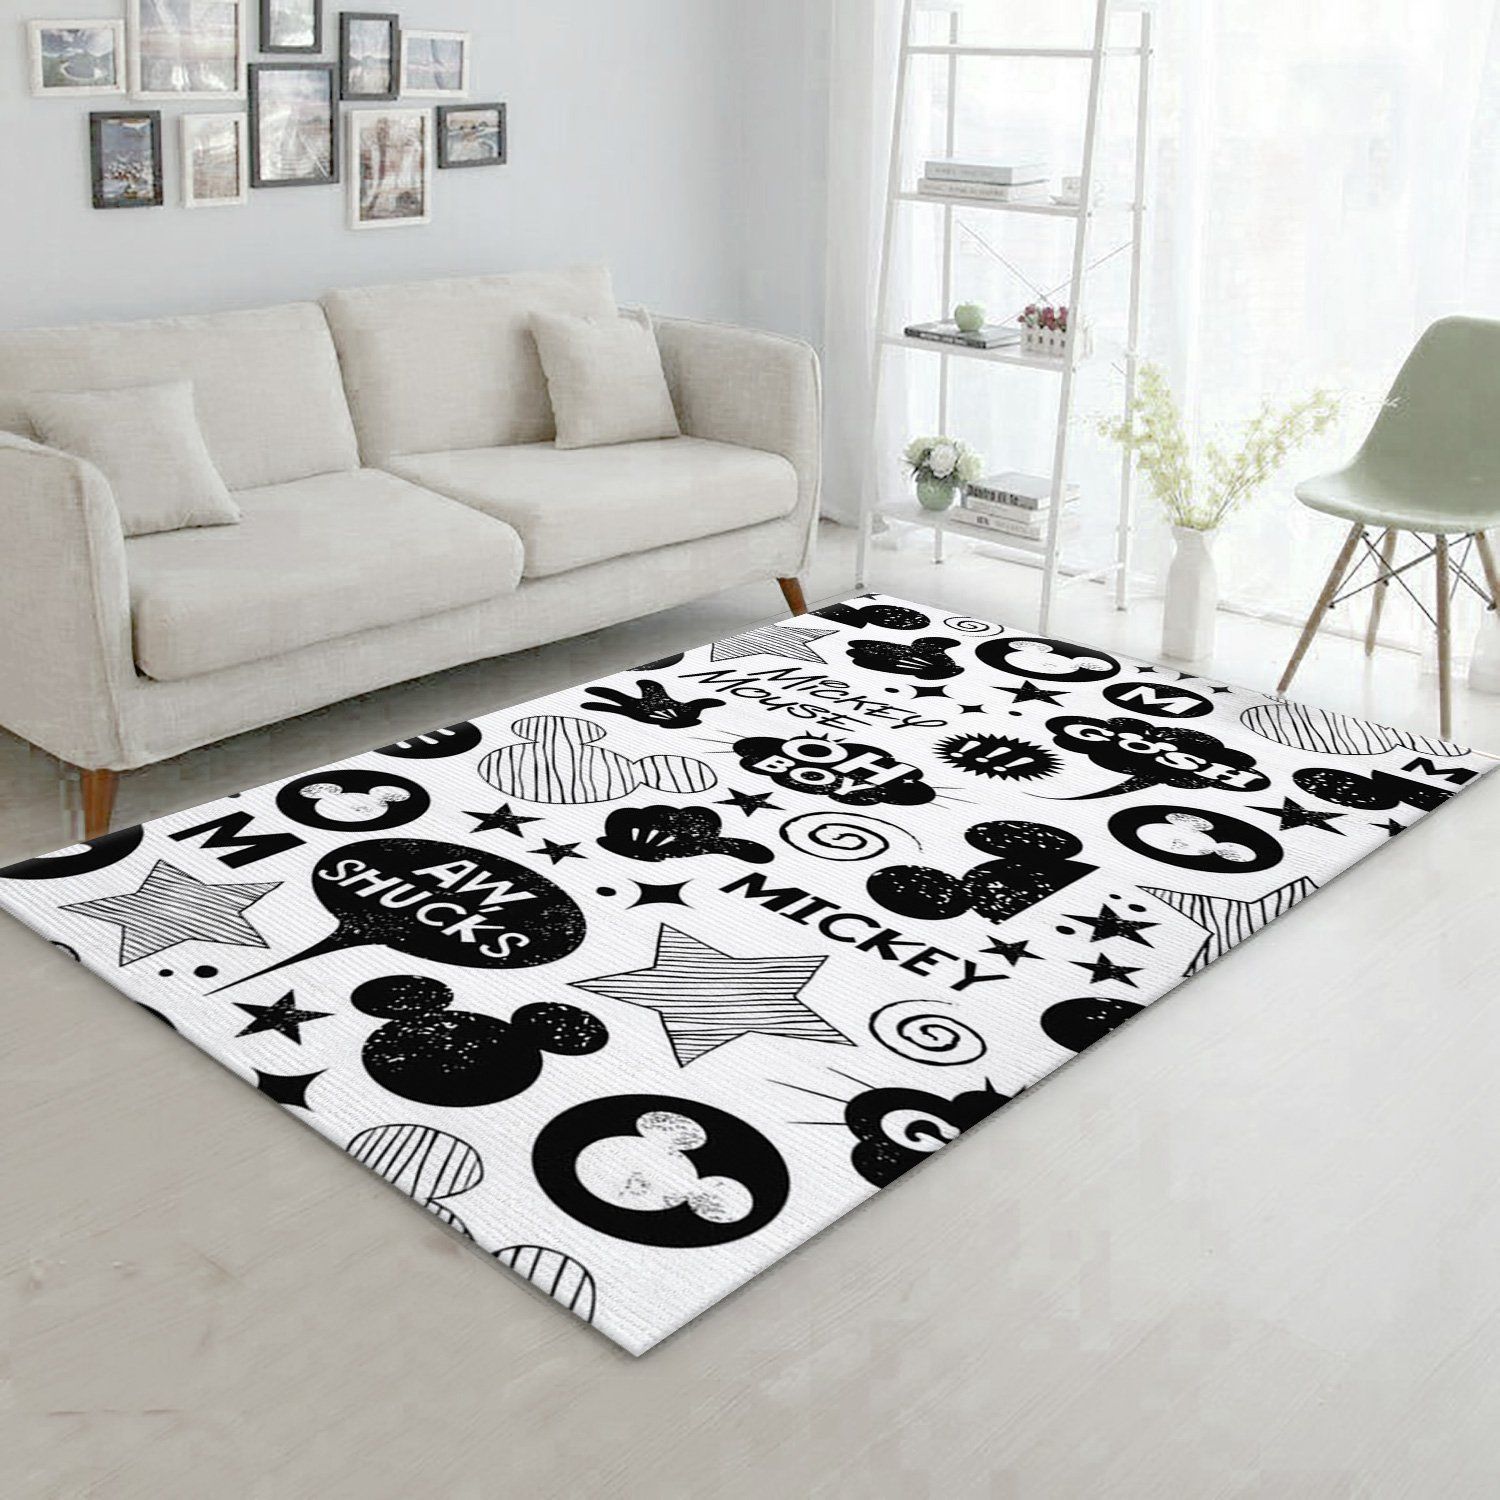 Minnie Mouse Black And White Area Rug For Christmas Living Room Rug Family Gift US Decor - Indoor Outdoor Rugs 2